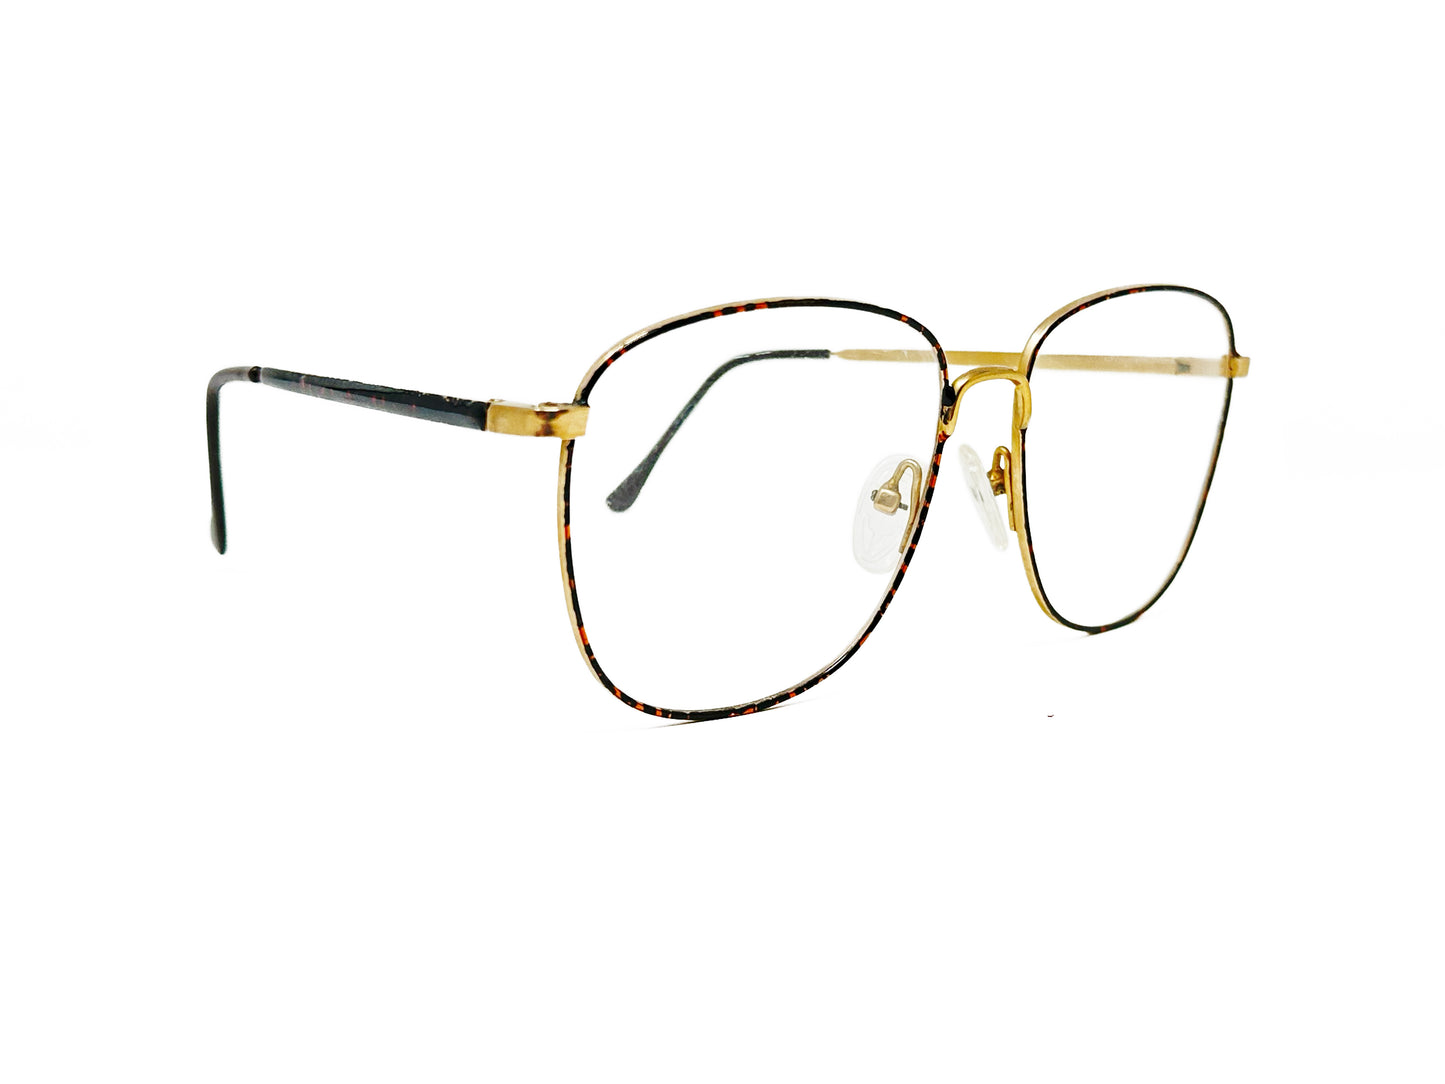 Barrett oversized, rounded-square optical frames. Model: Rounded Square. Color: Gold Tortoise. Side view.